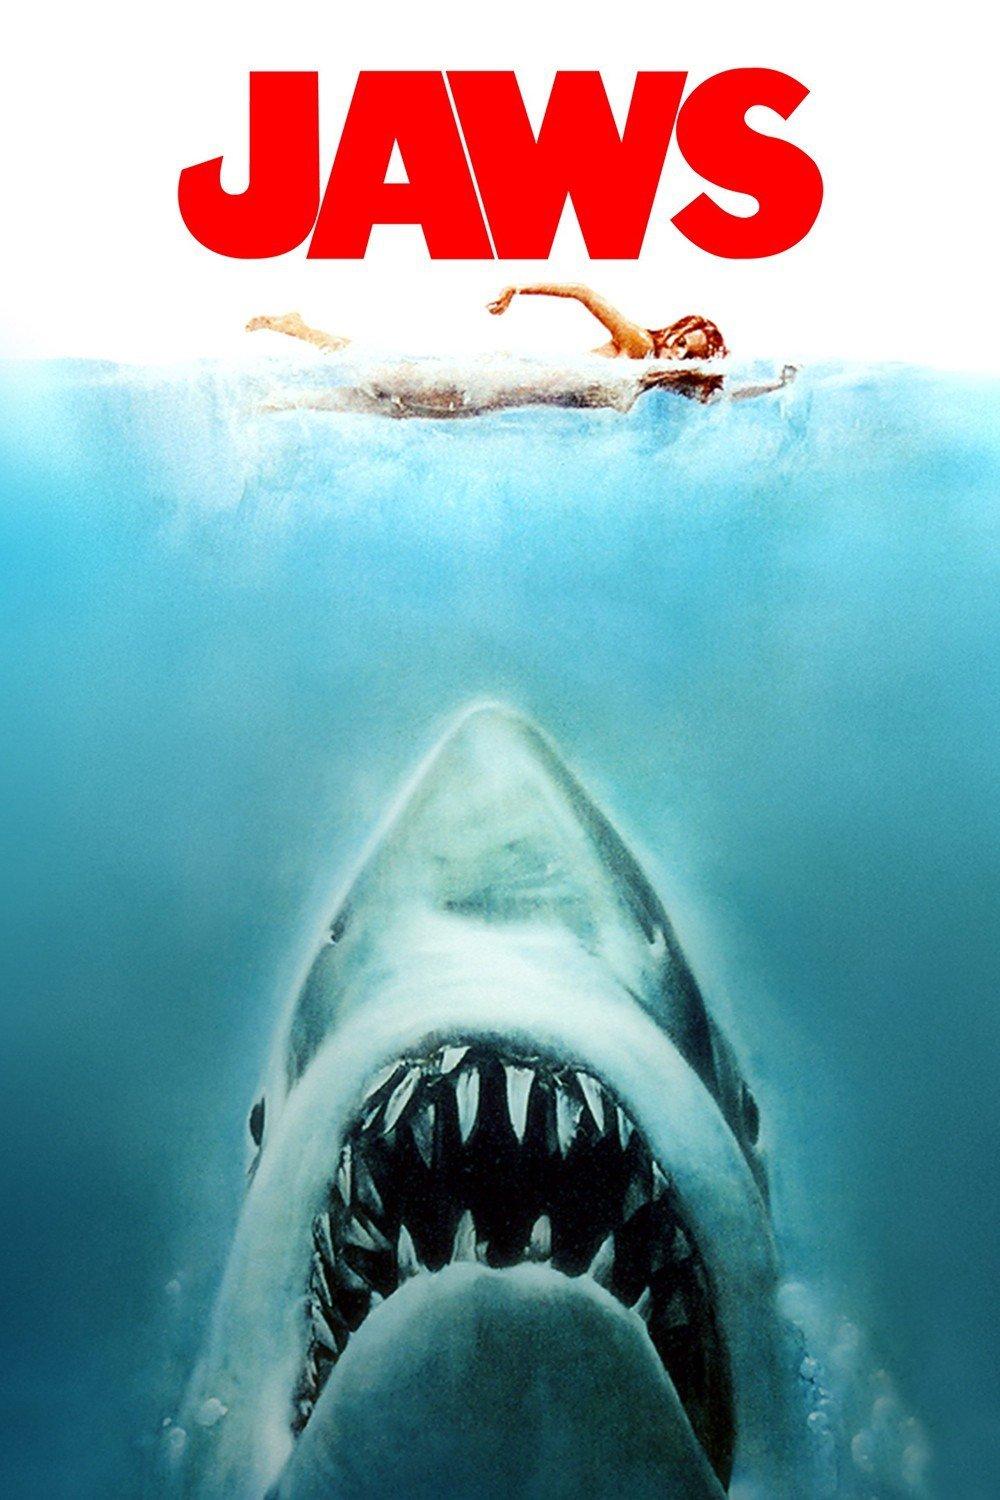 Ready for SHARK WEEK? See Jaws July 25 at the Bedford Playhouse